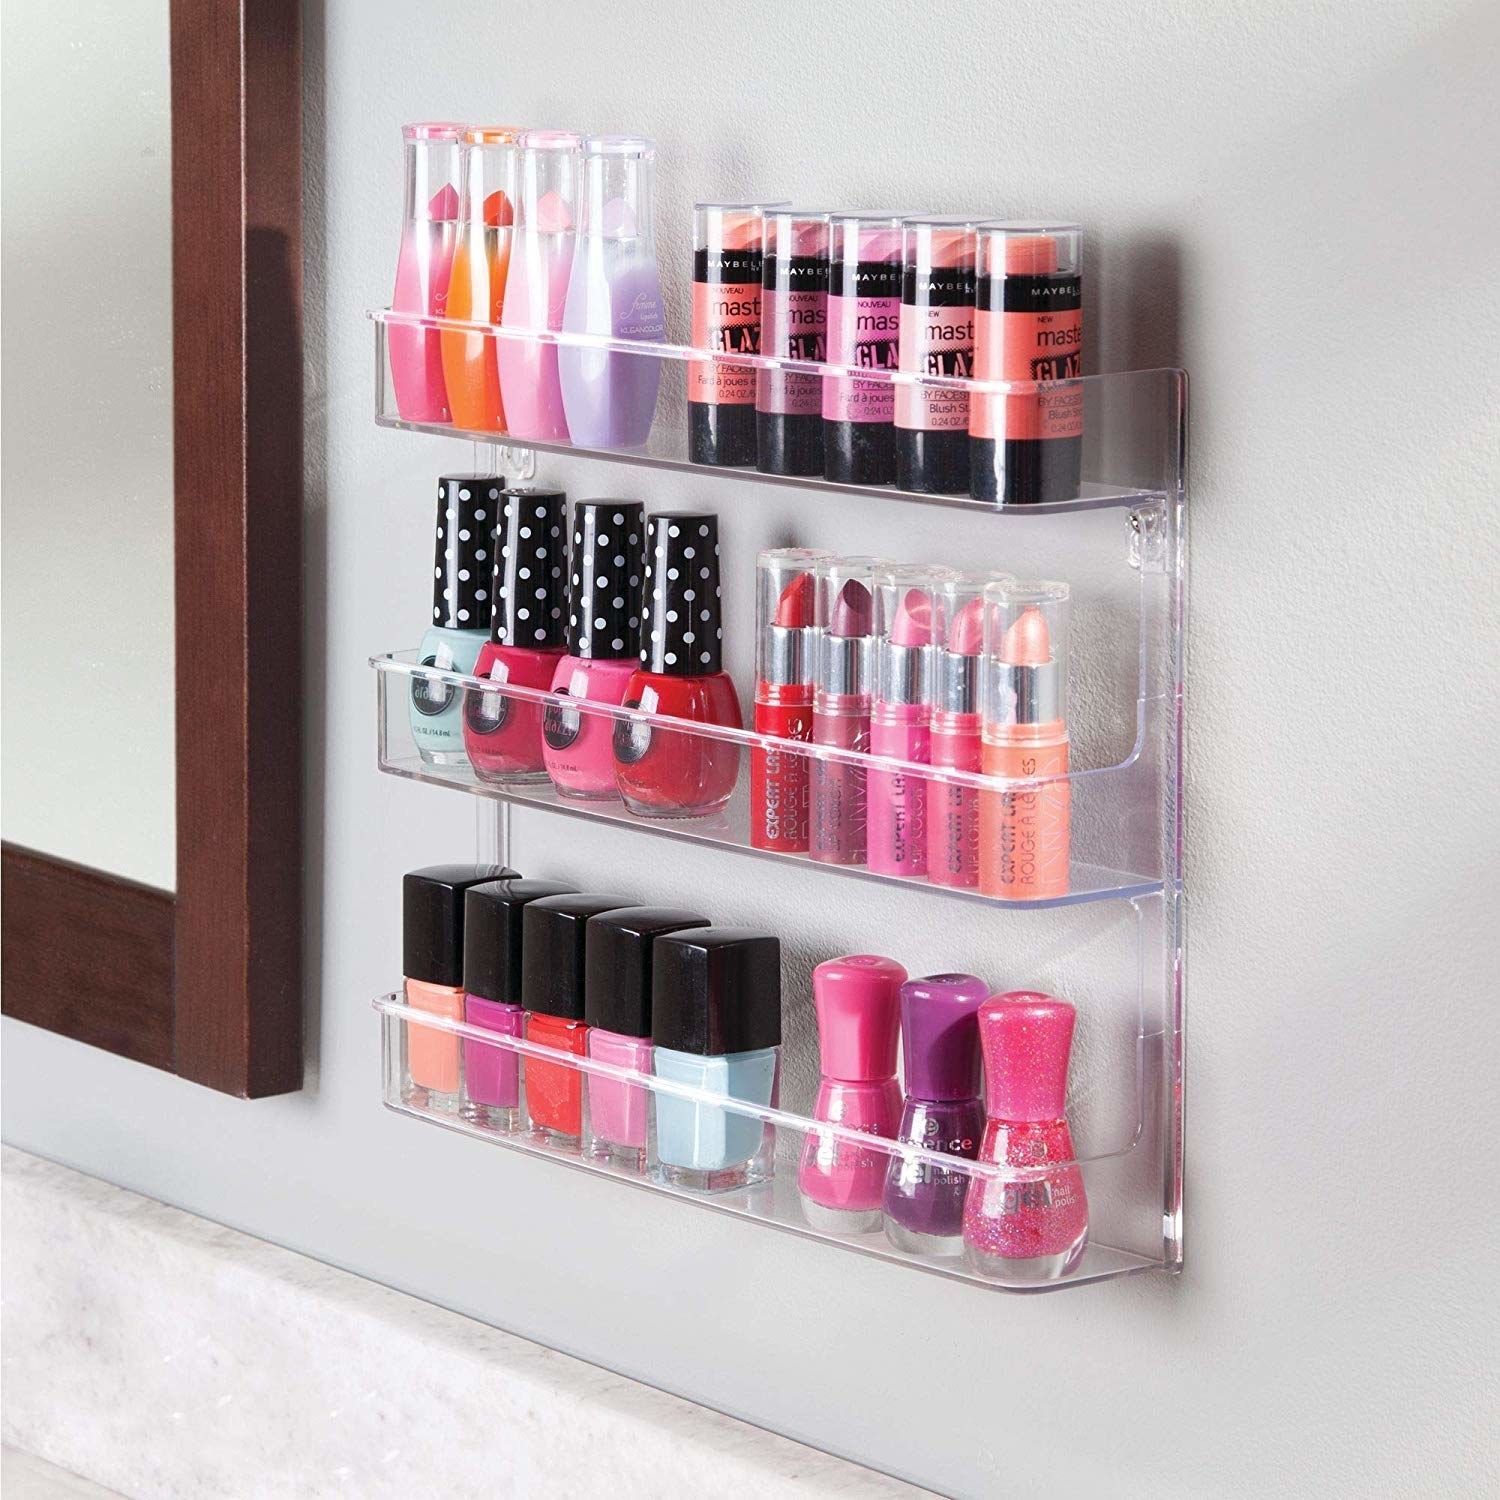 27 Products To Organize Your Bathroom On Amazon Canada